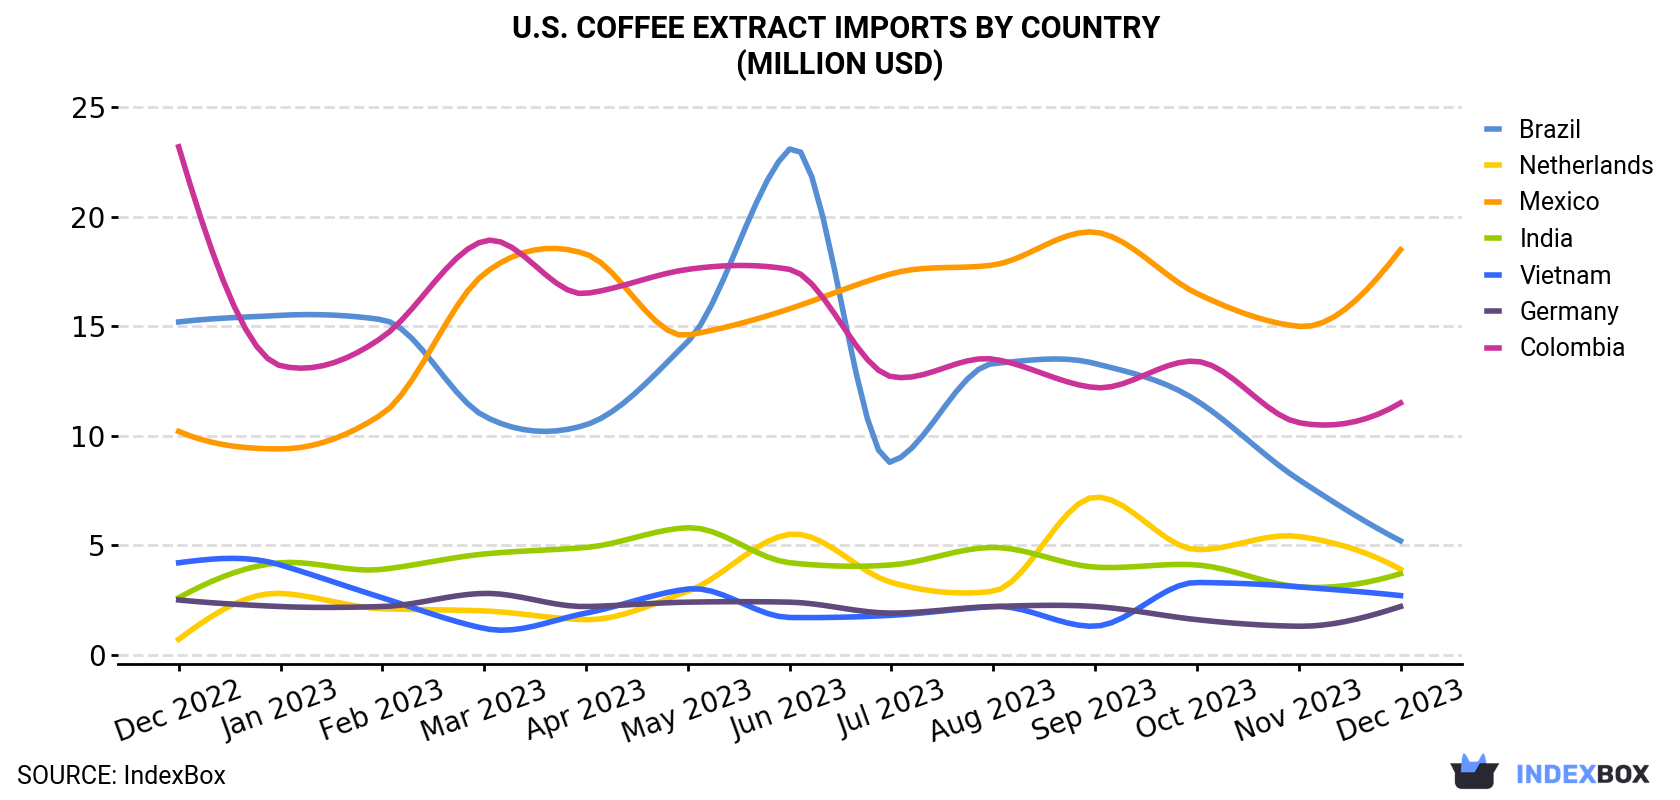 U.S. Coffee Extract Imports By Country (Million USD)